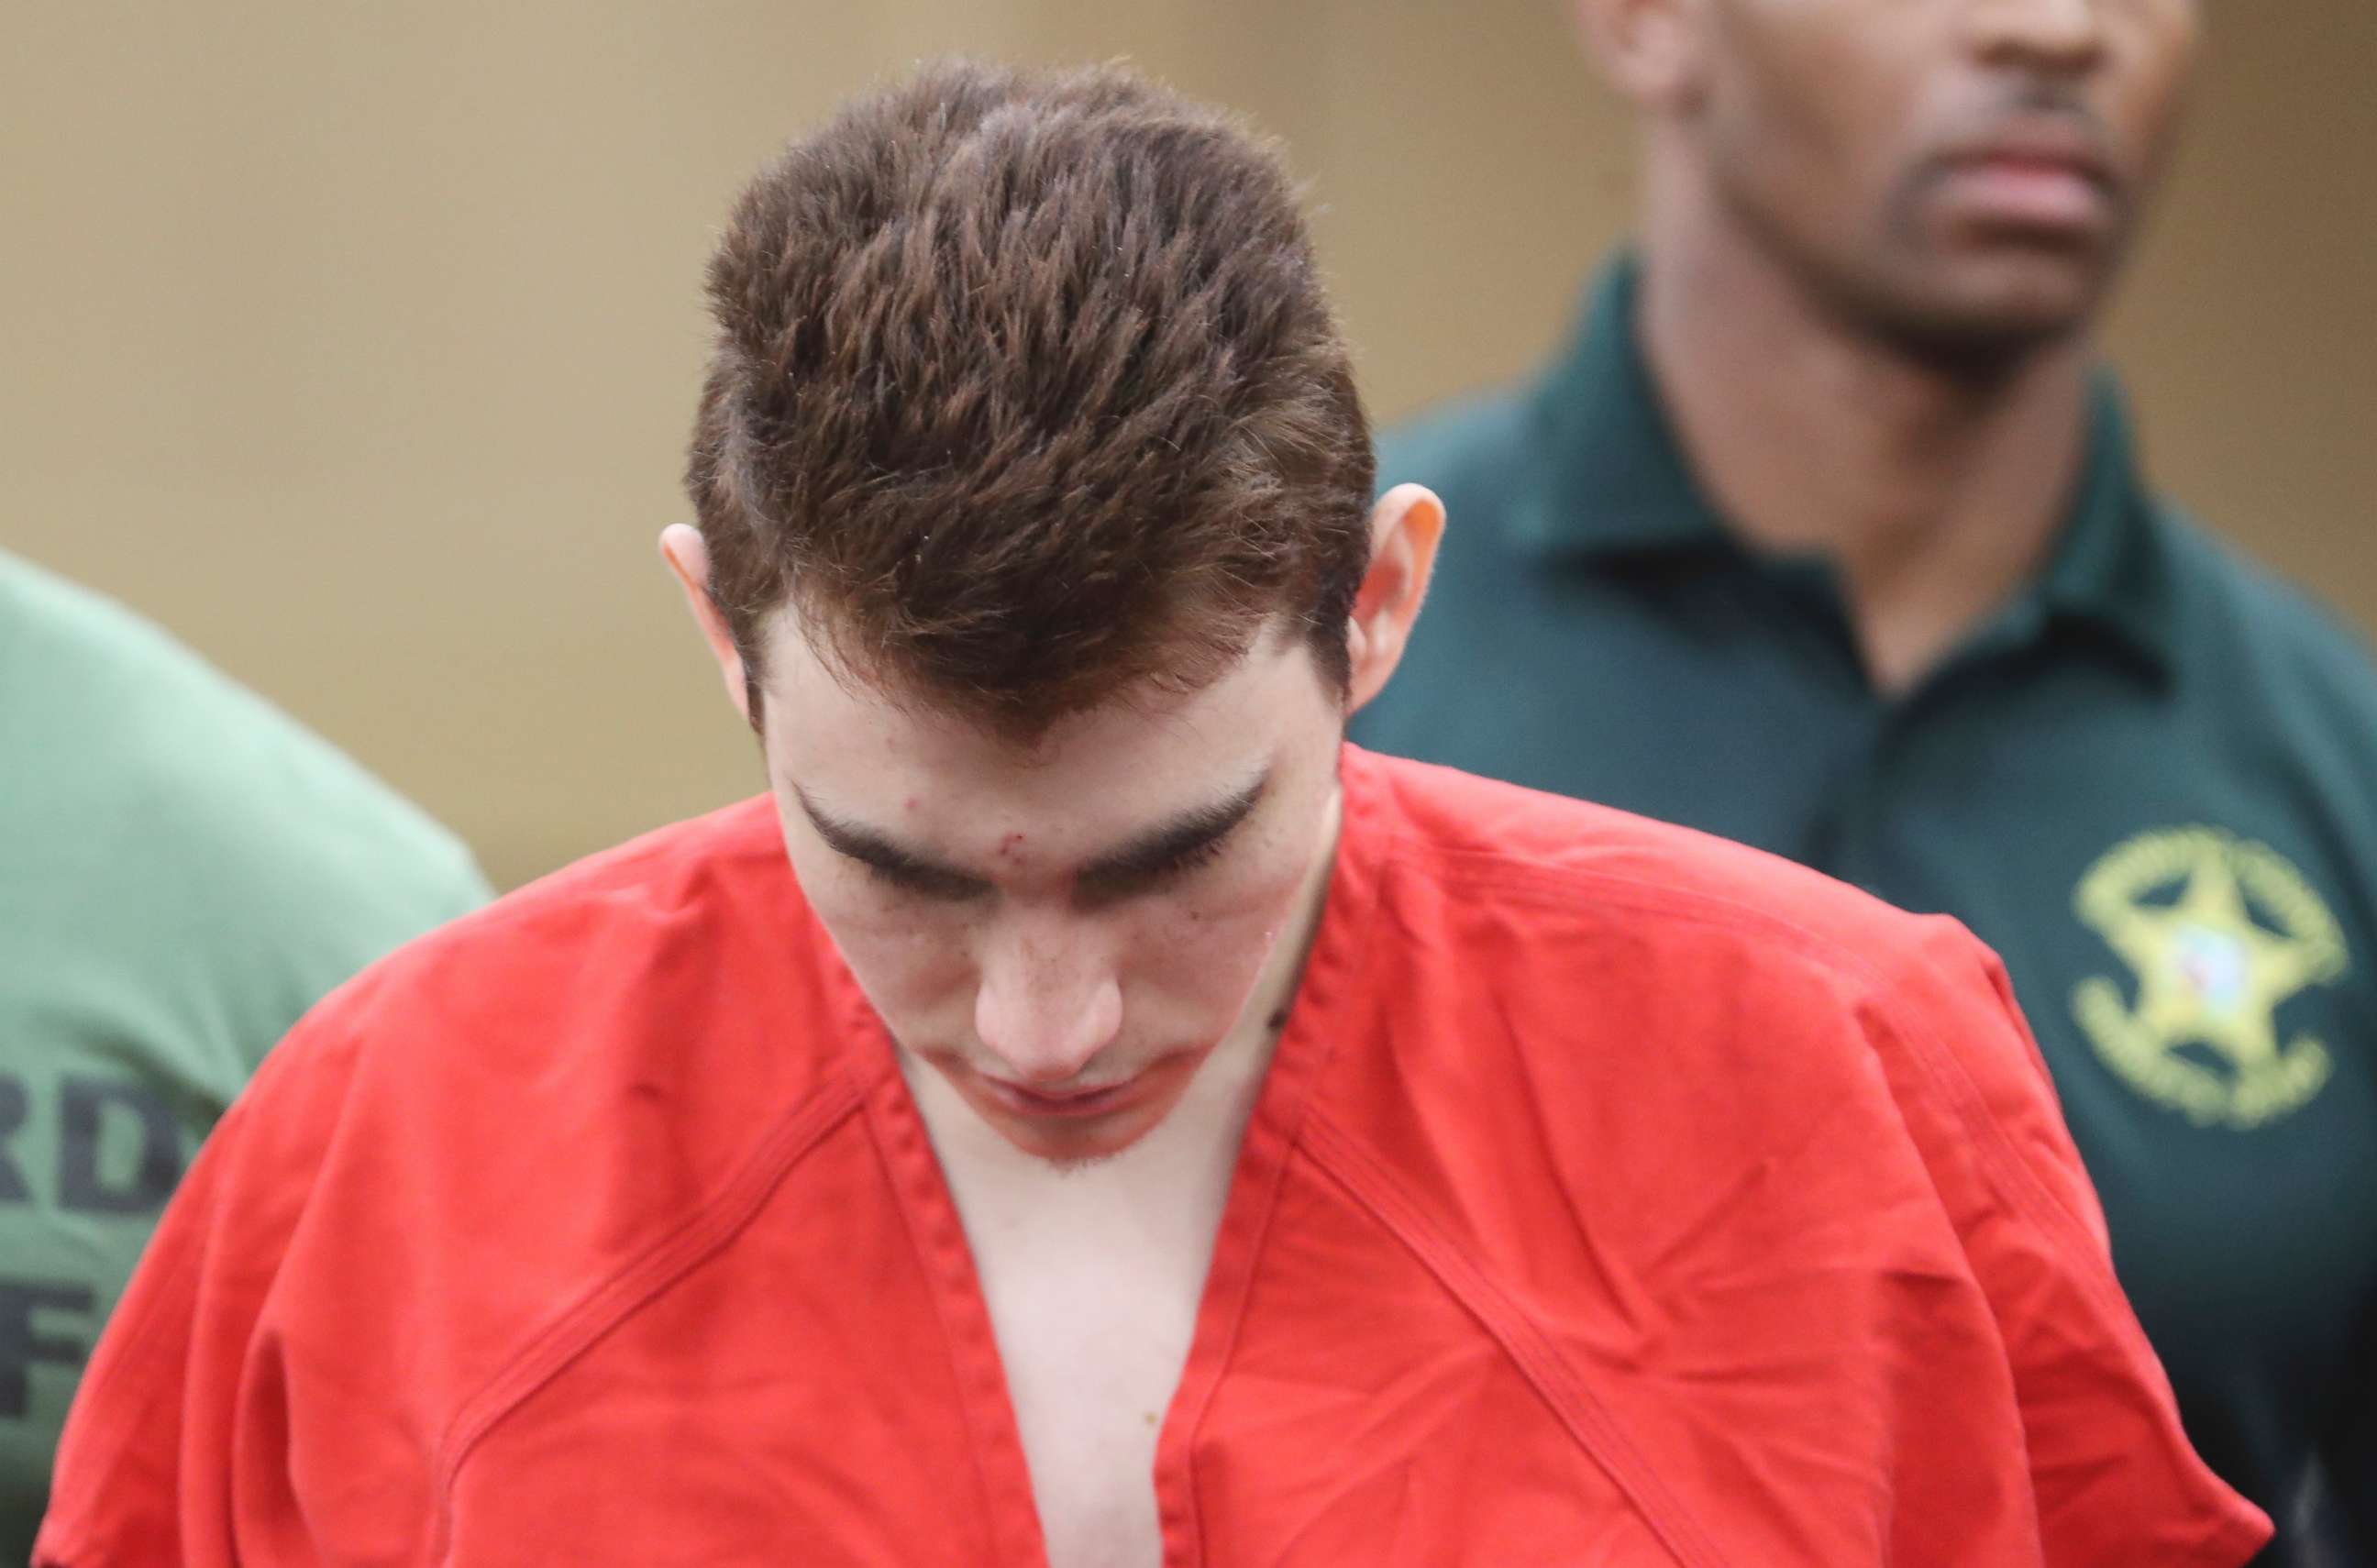 PHOTO: Nikolas Cruz is lead out of the courtroom after an arraignment hearing at the Broward County Courthouse in Fort Lauderdale, Fla., March 14, 2018.